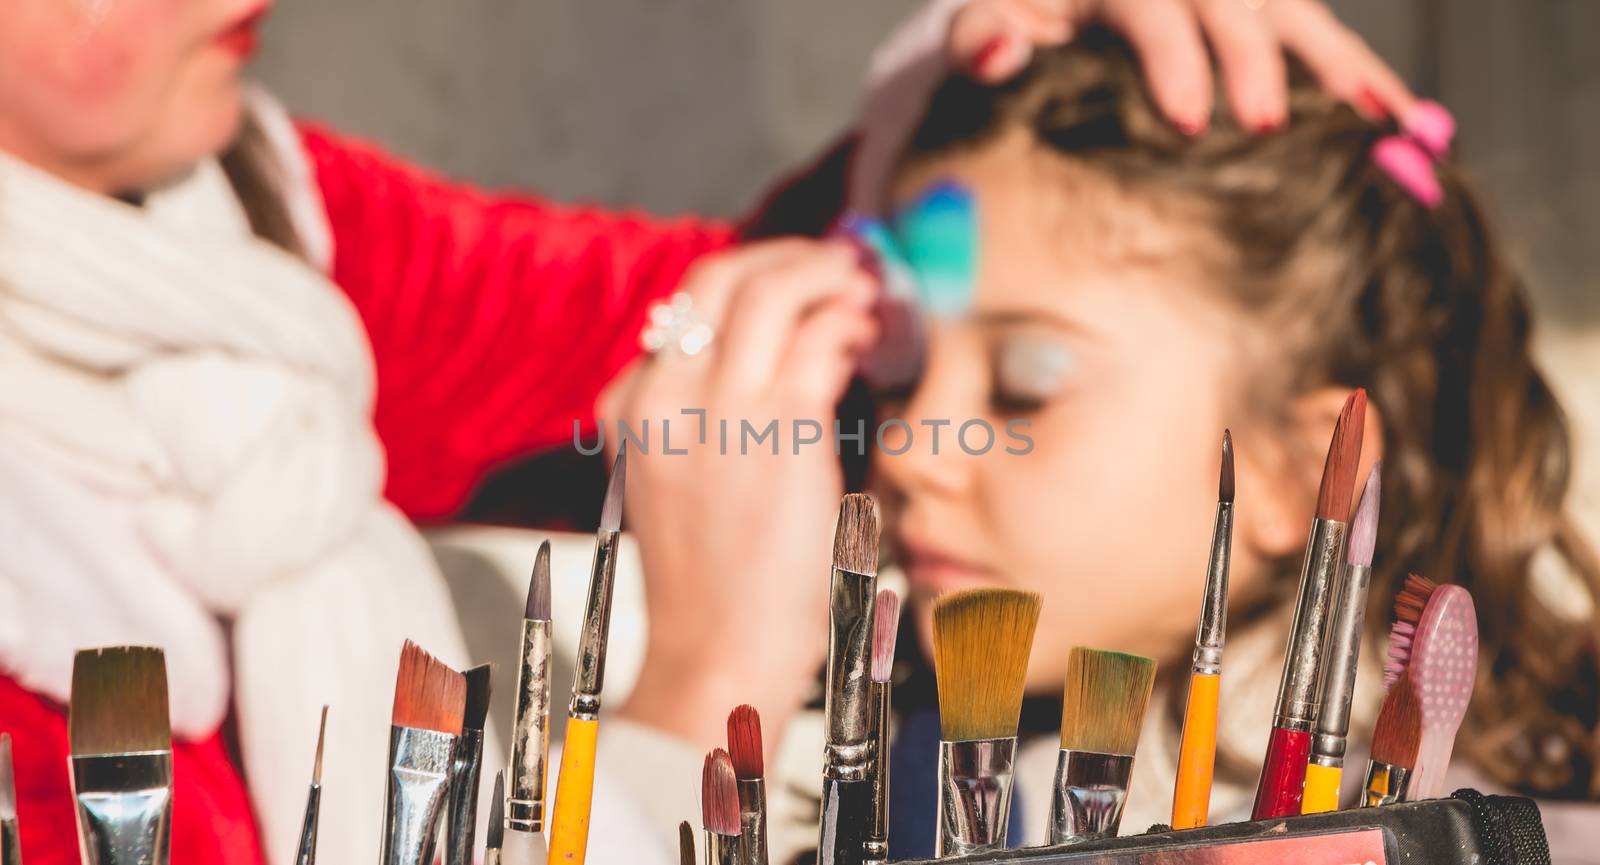 Bretignolles sur Mer, France - December 18, 2016 : During the Christmas period, a little girl is applying makeup in a stand on a Christmas market